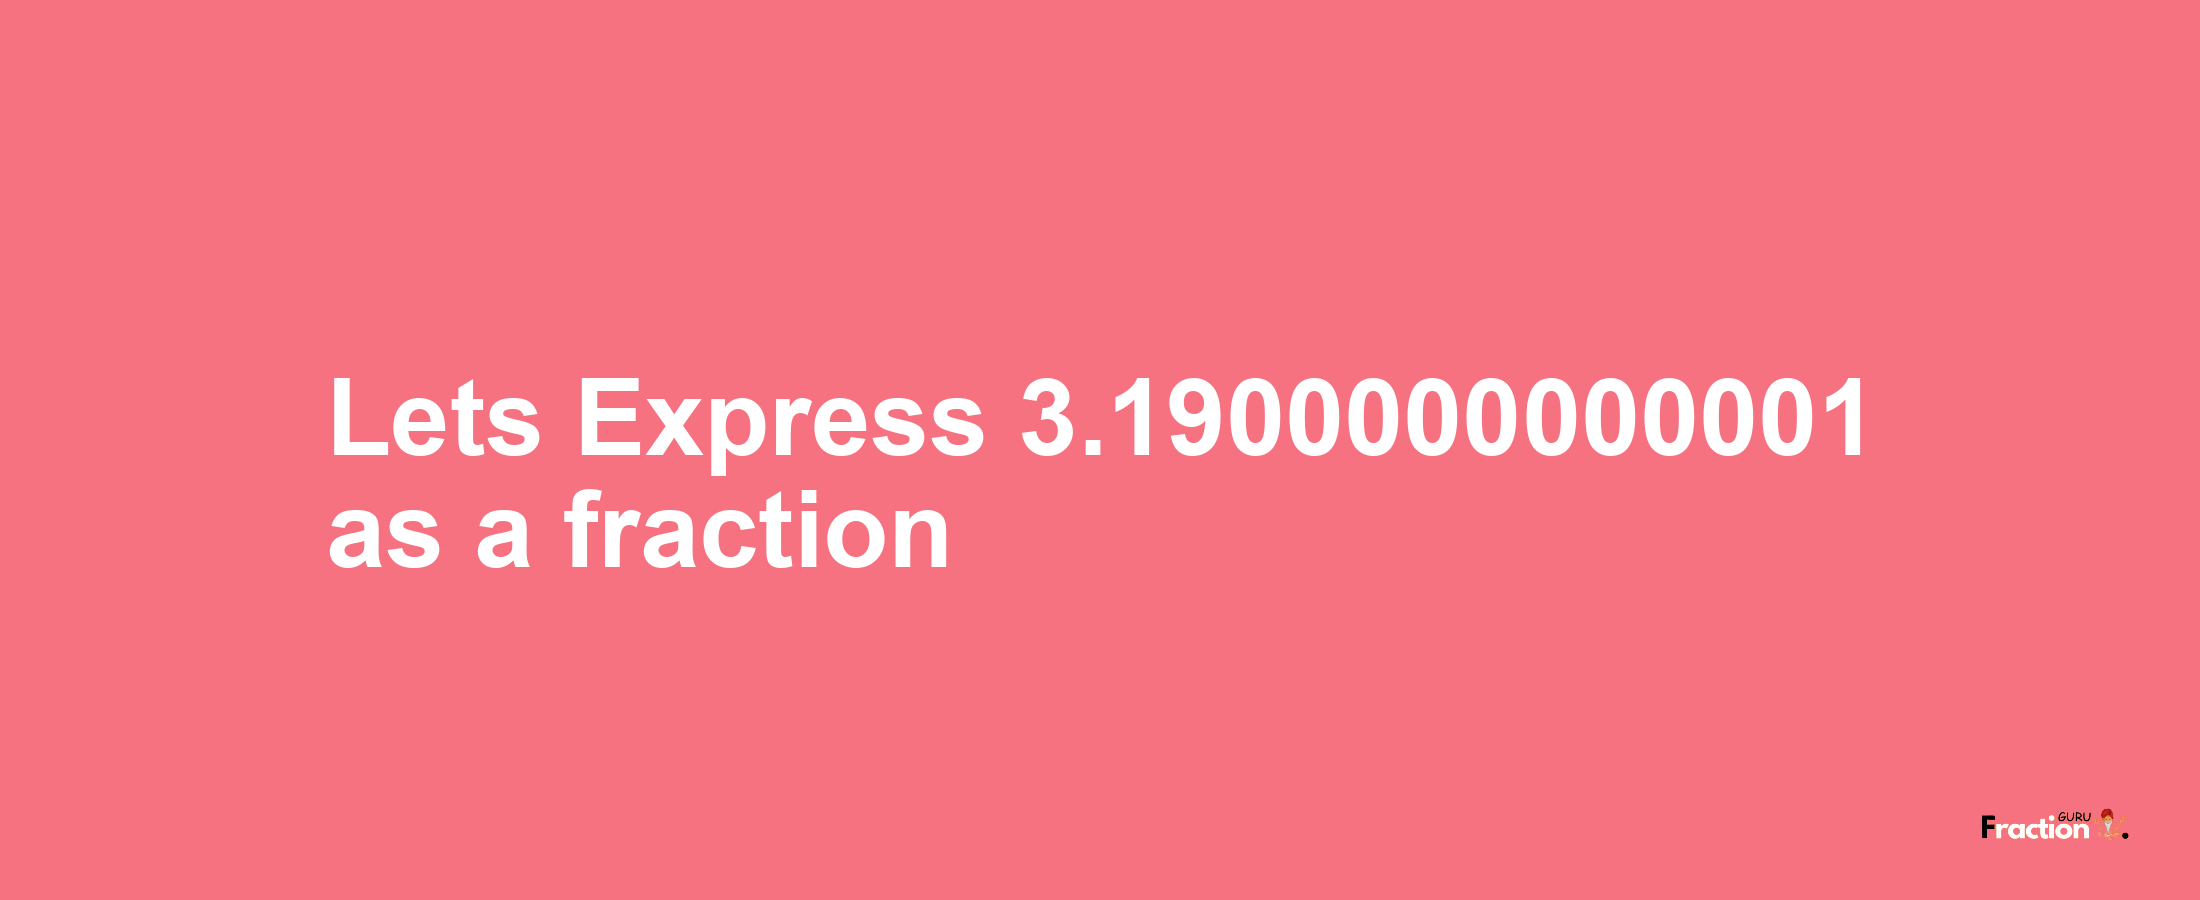 Lets Express 3.1900000000001 as afraction